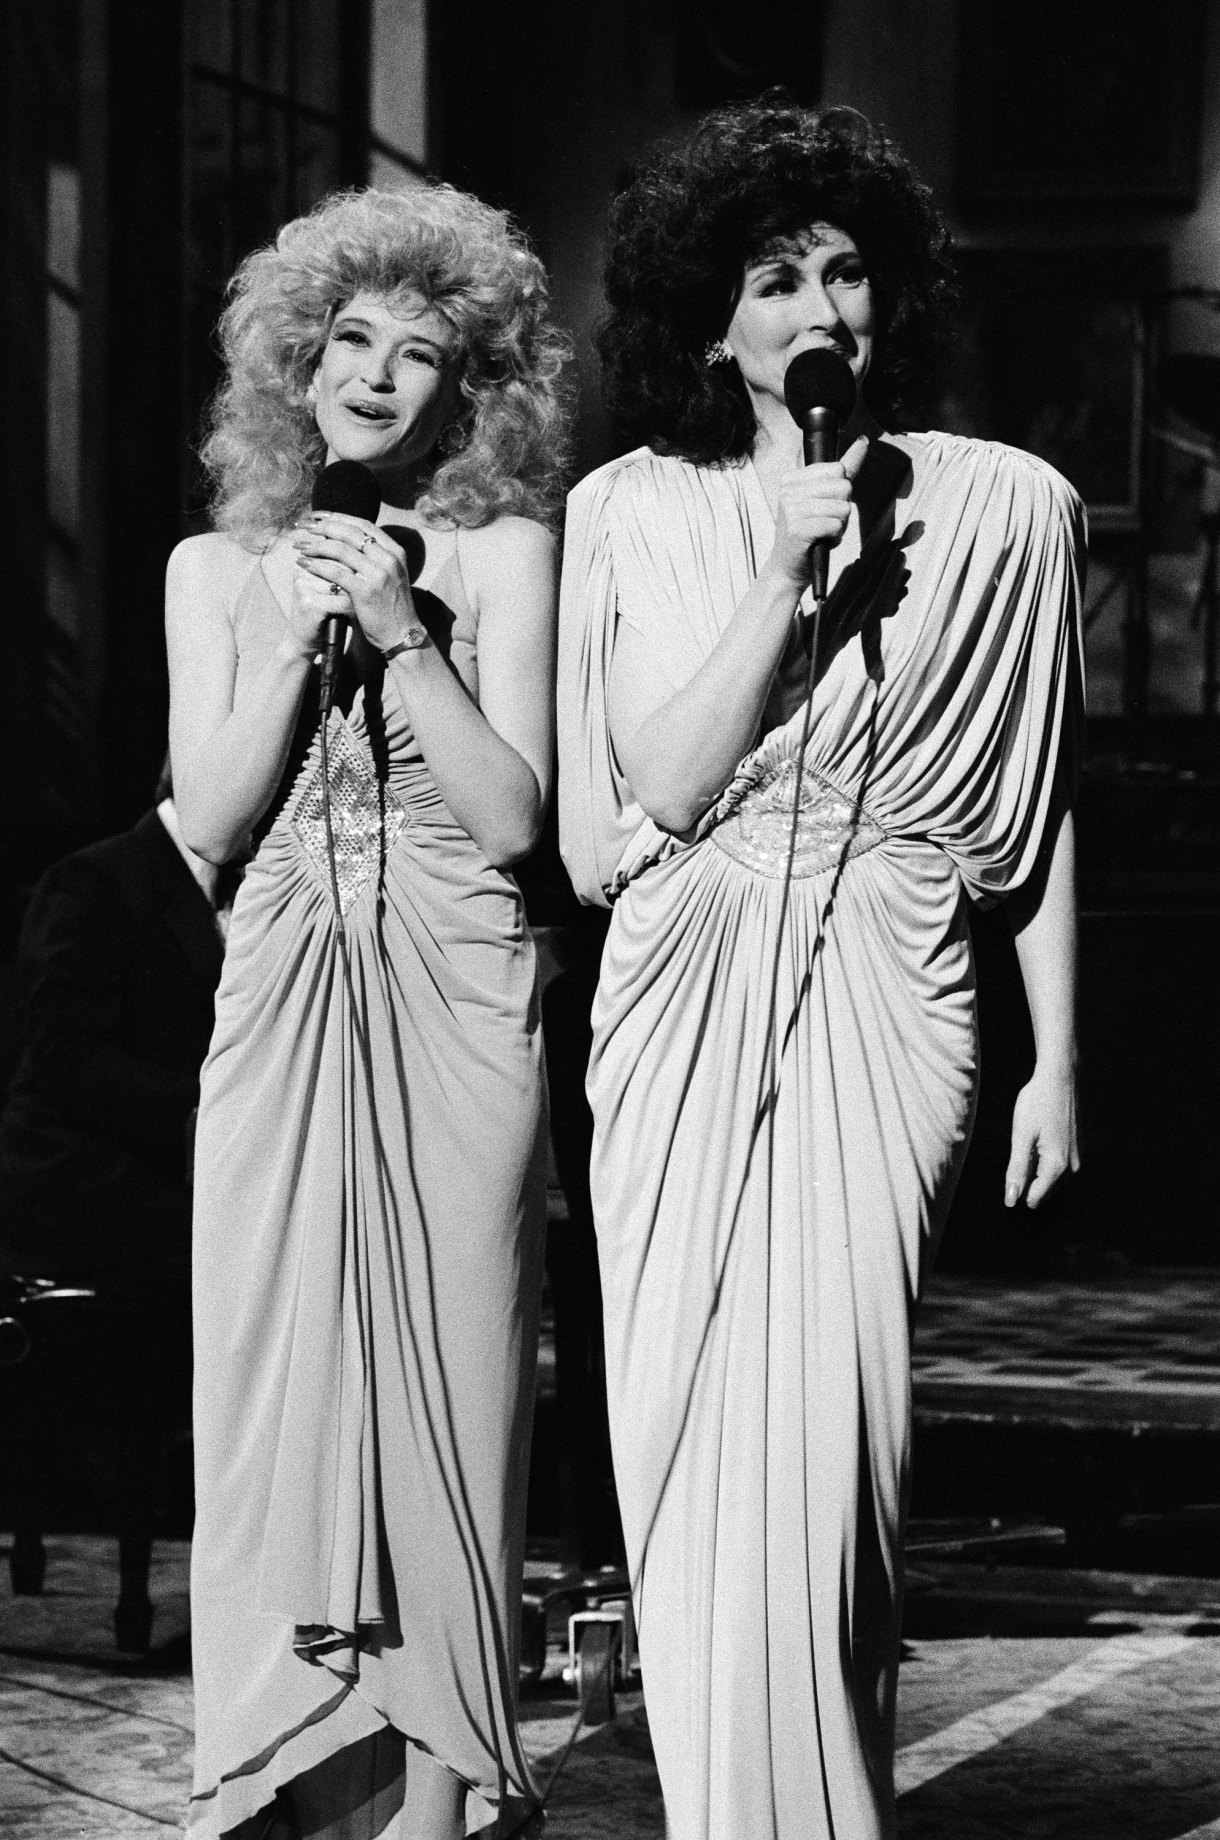 SATURDAY NIGHT LIVE -- Episode 20 -- Pictured: (l-r) Jan Hooks as Candy Sweeney, Nora Dunn as Liz Sweeney during the 'Sweeney Sisters' skit on May 23, 1987 -- 